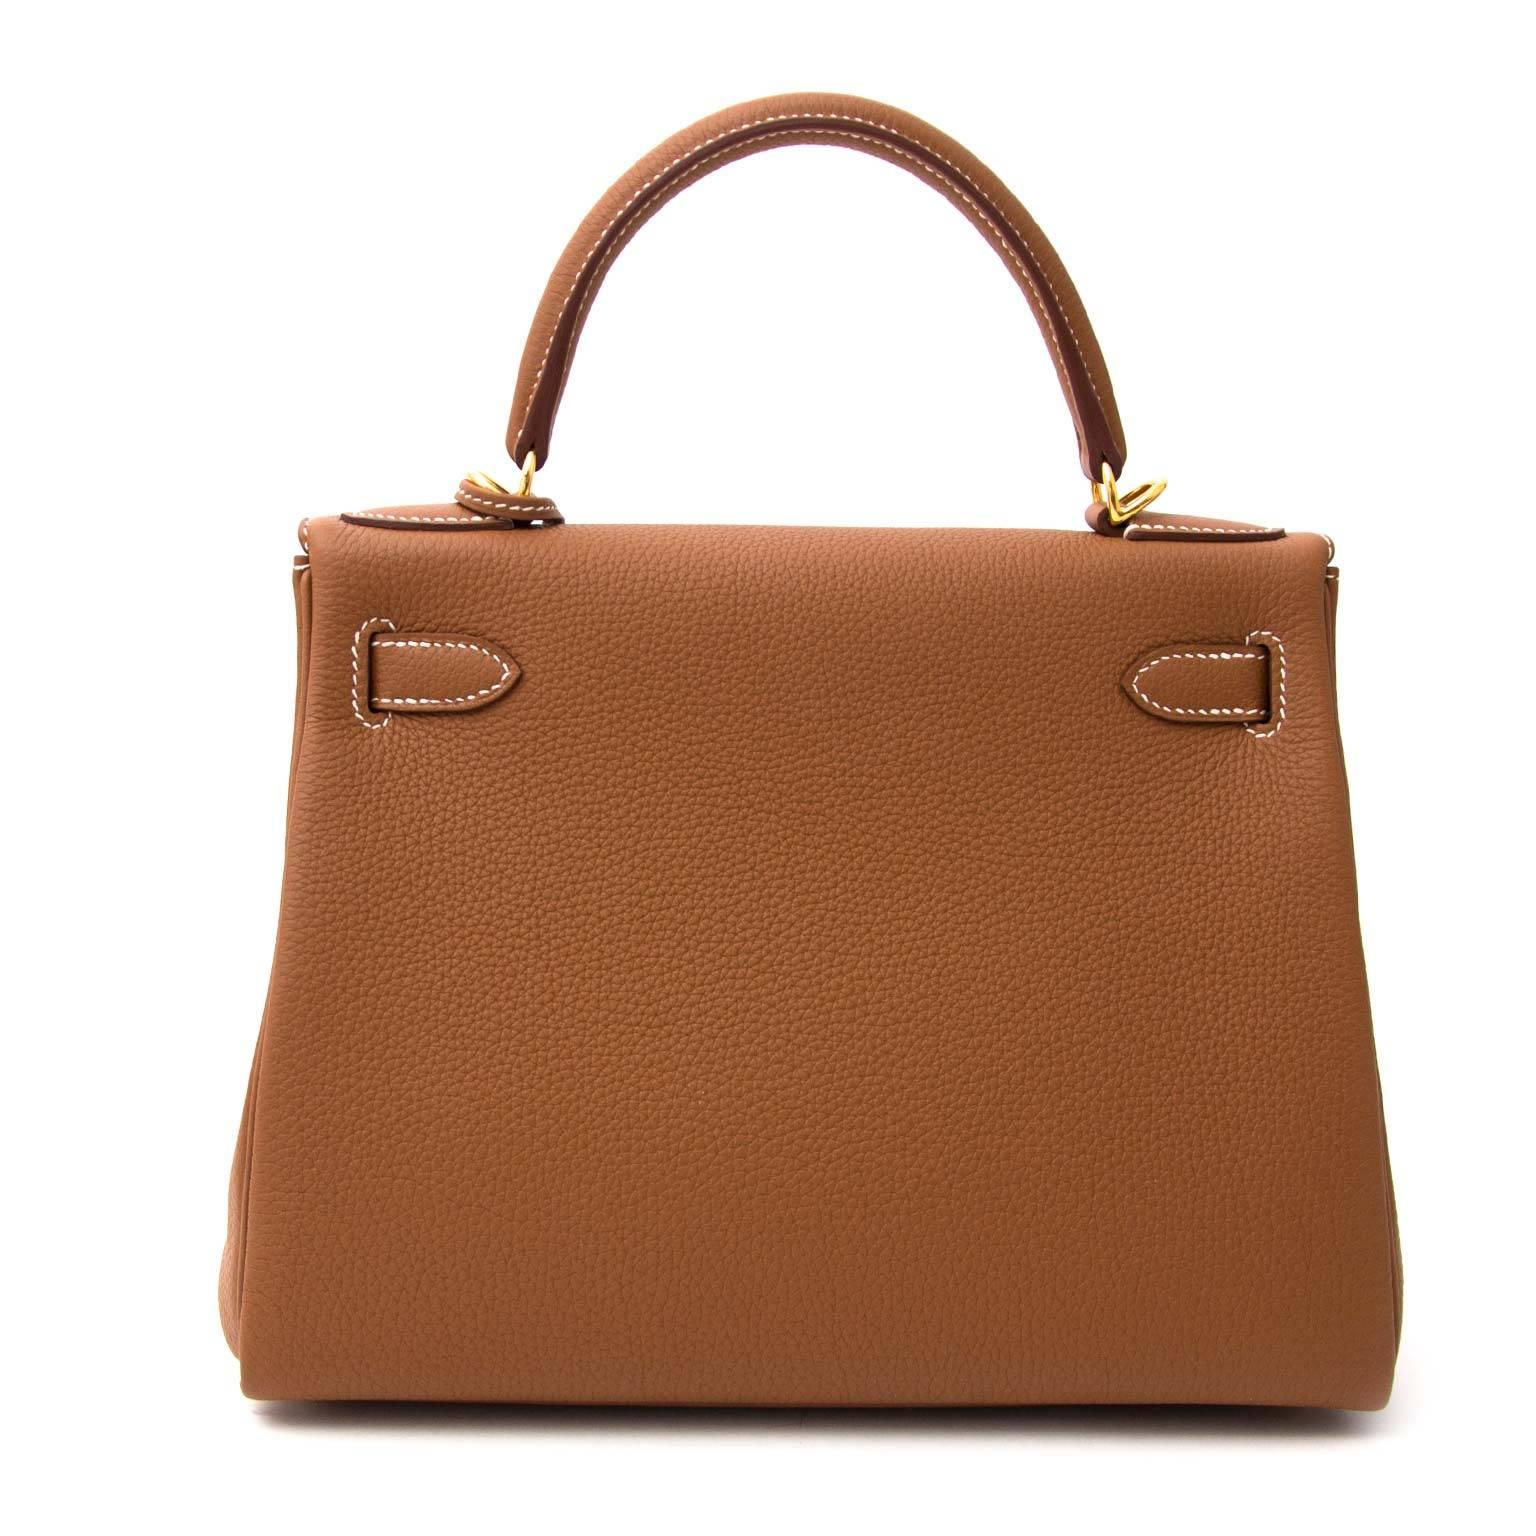 Never Used!

Hermès Kelly 28 Togo Gold GHW

This Hermès Kelly in timeless gold is a real statement piece.

The Kelly bag is made out of togo leather which is almost entirely scratch resistant and its grainy smooth texture is very nice.

The gold